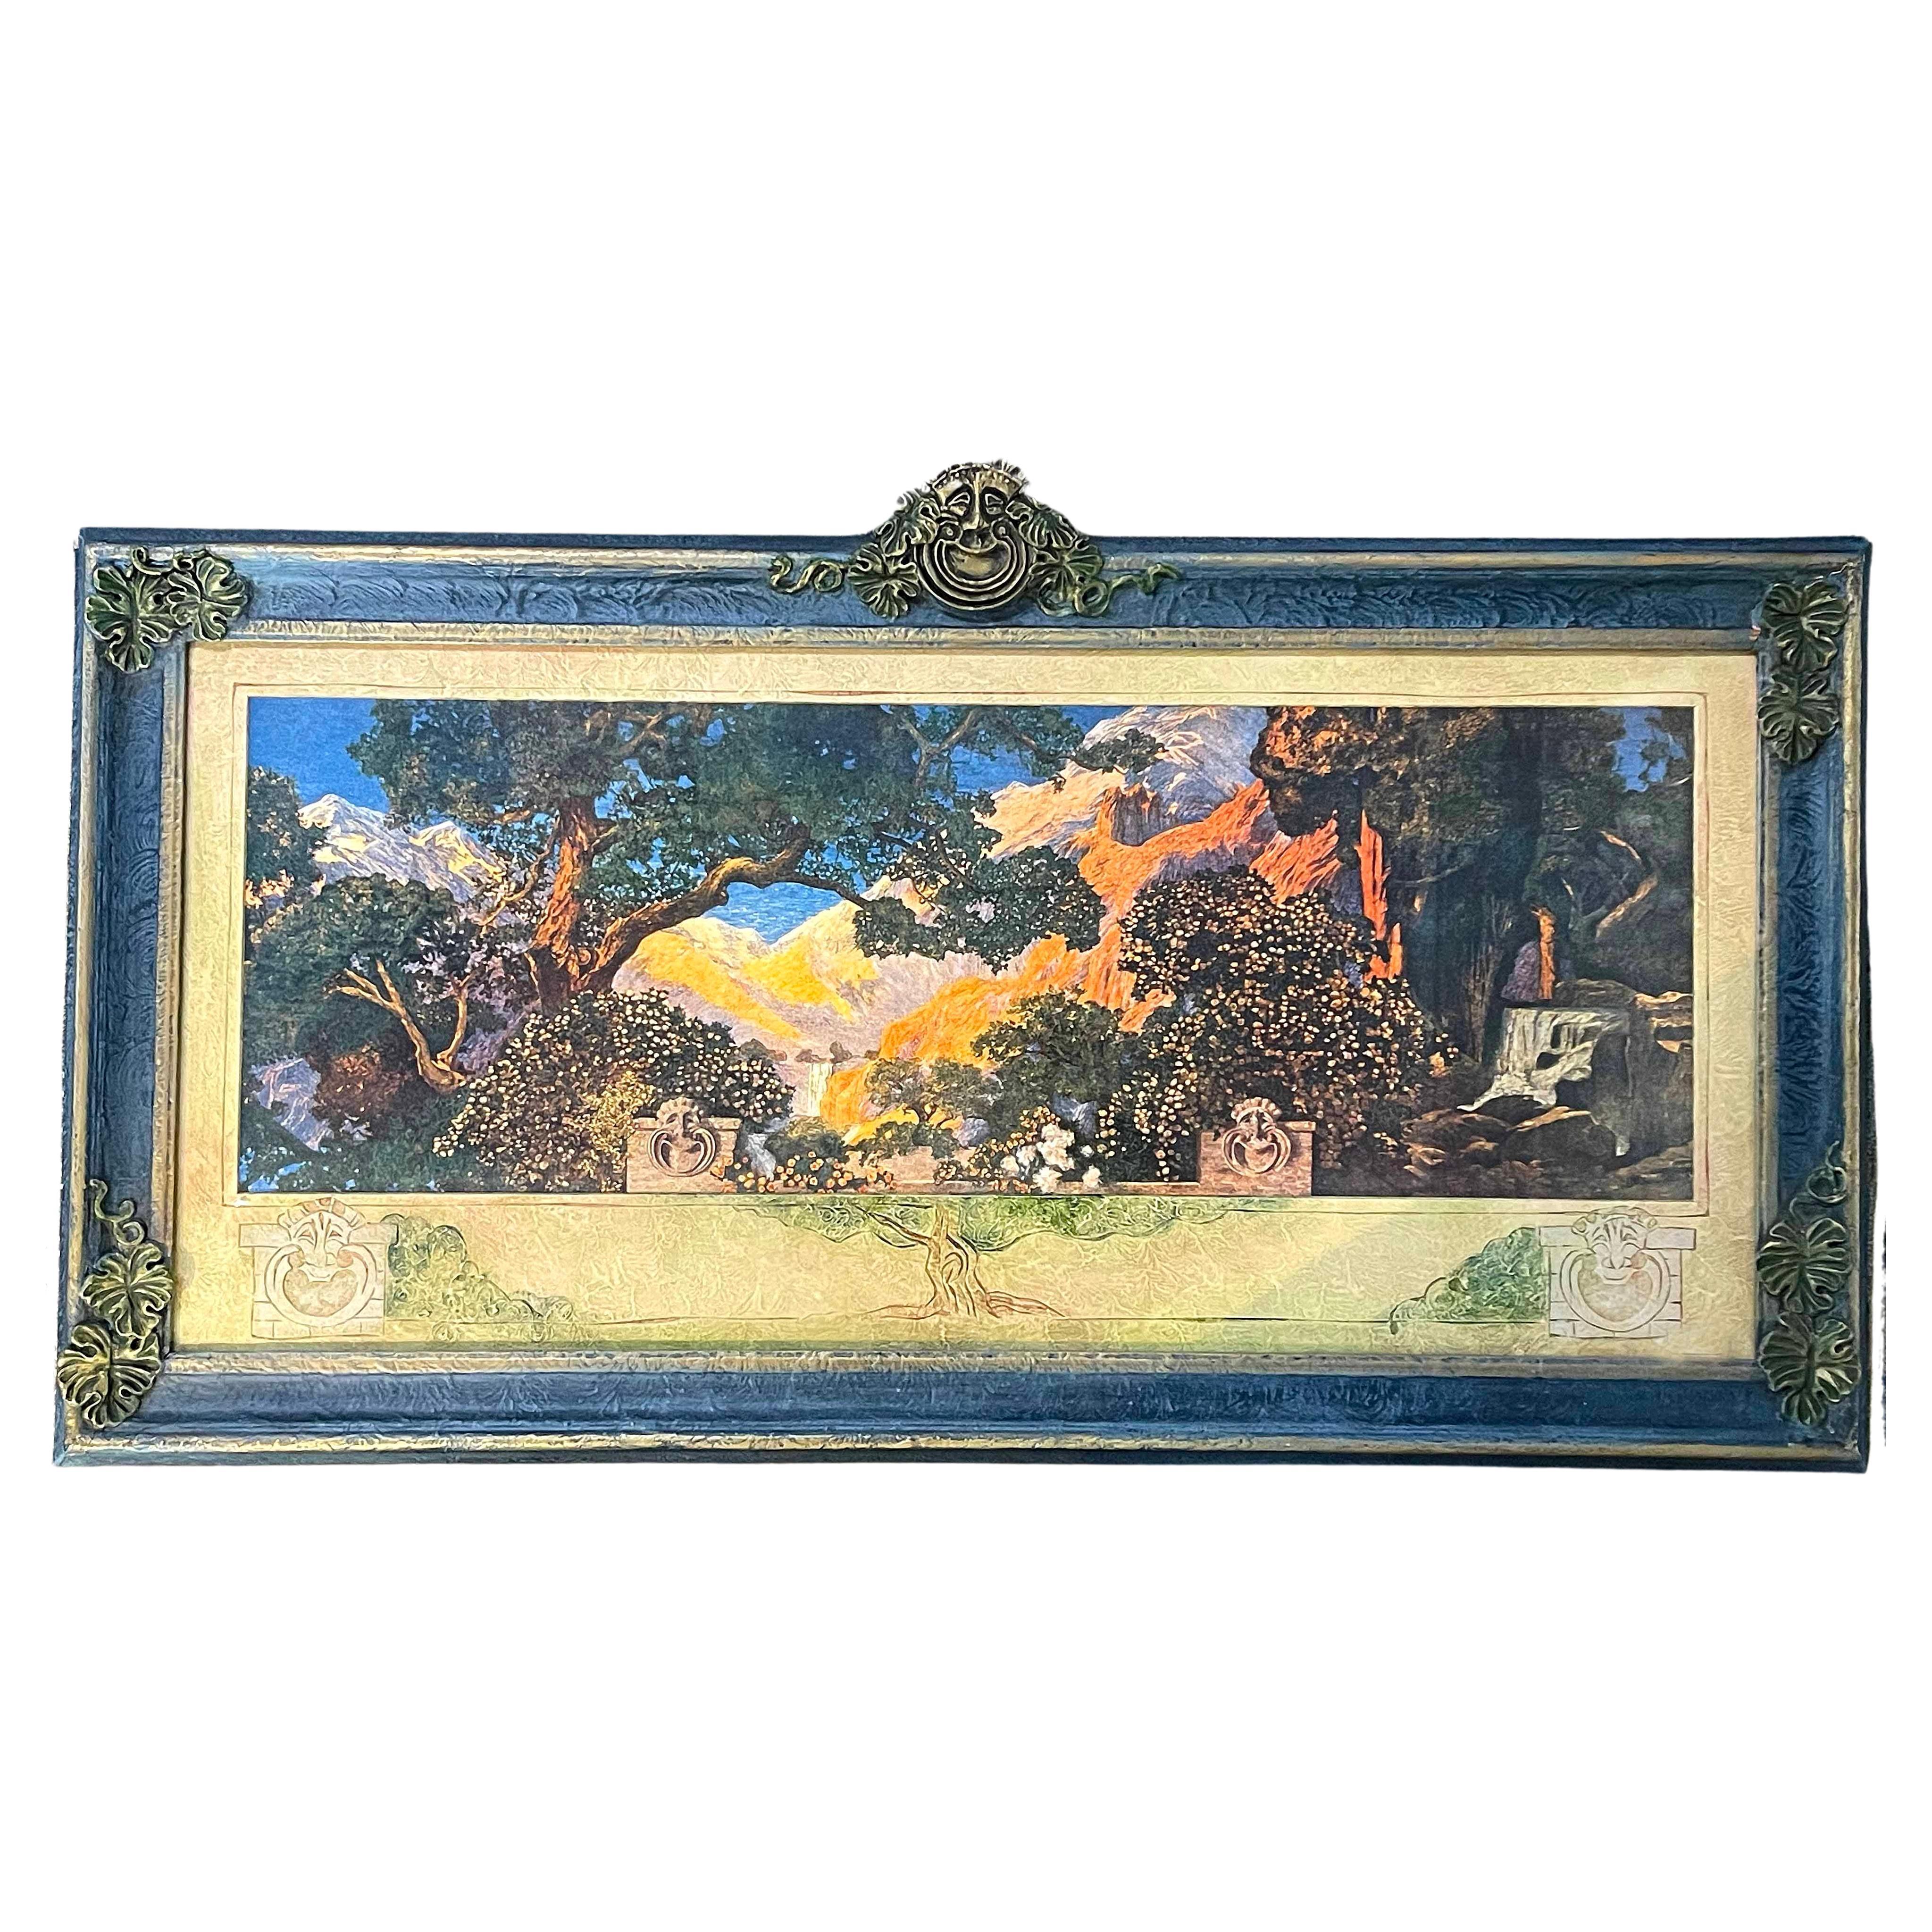 "Dream Garden", Spectacular 1920s Print with Maxfield Parrish-Inspired Frame